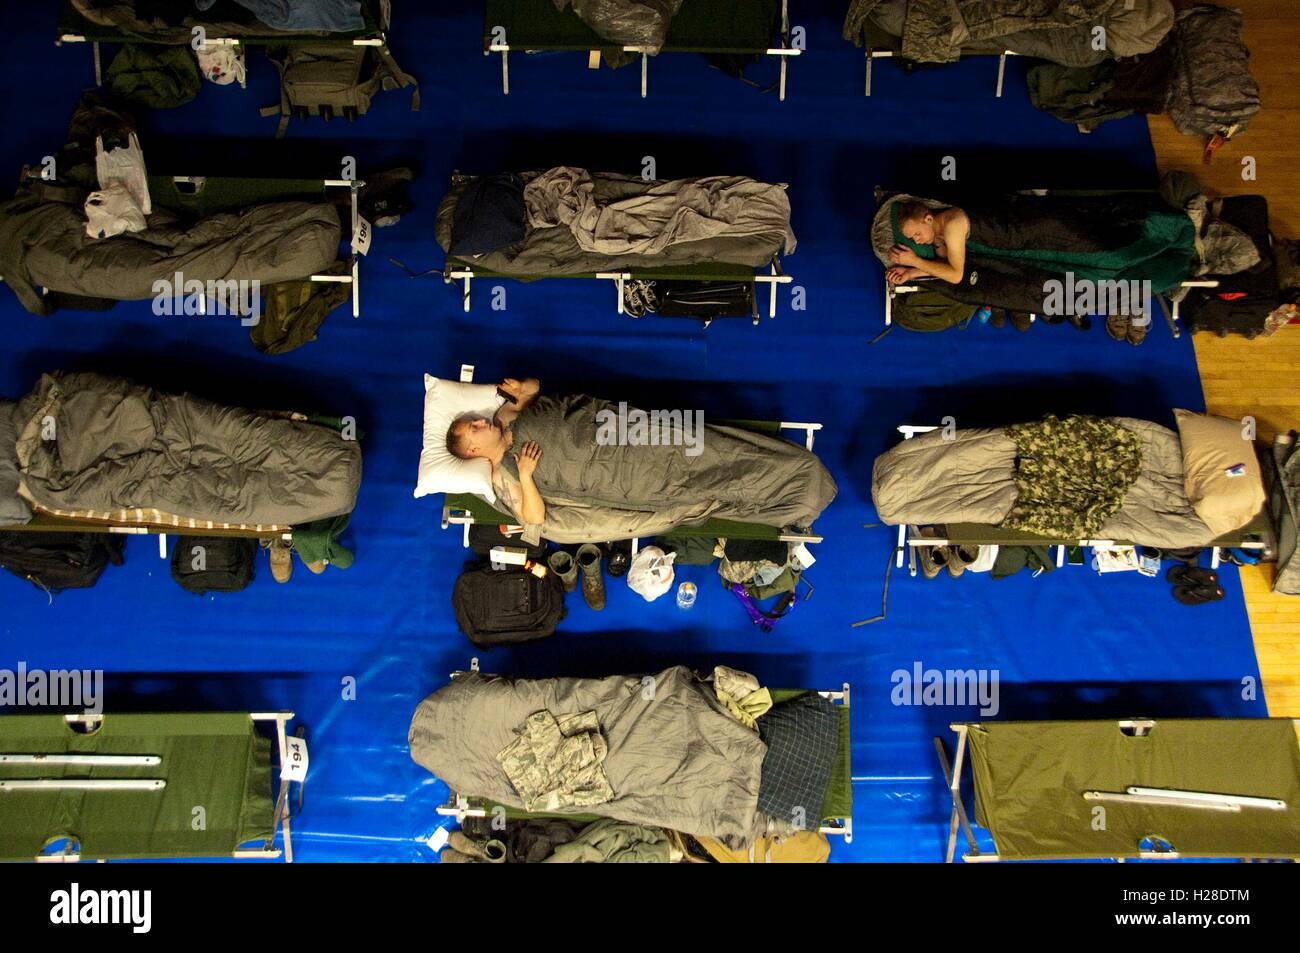 American and South Korean soldiers sleep in rows of cots during joint military exercise Key Resolve at the Osan Air Base Fitness and Sports Complex March 2, 2015 in Osan, South Korea. Stock Photo